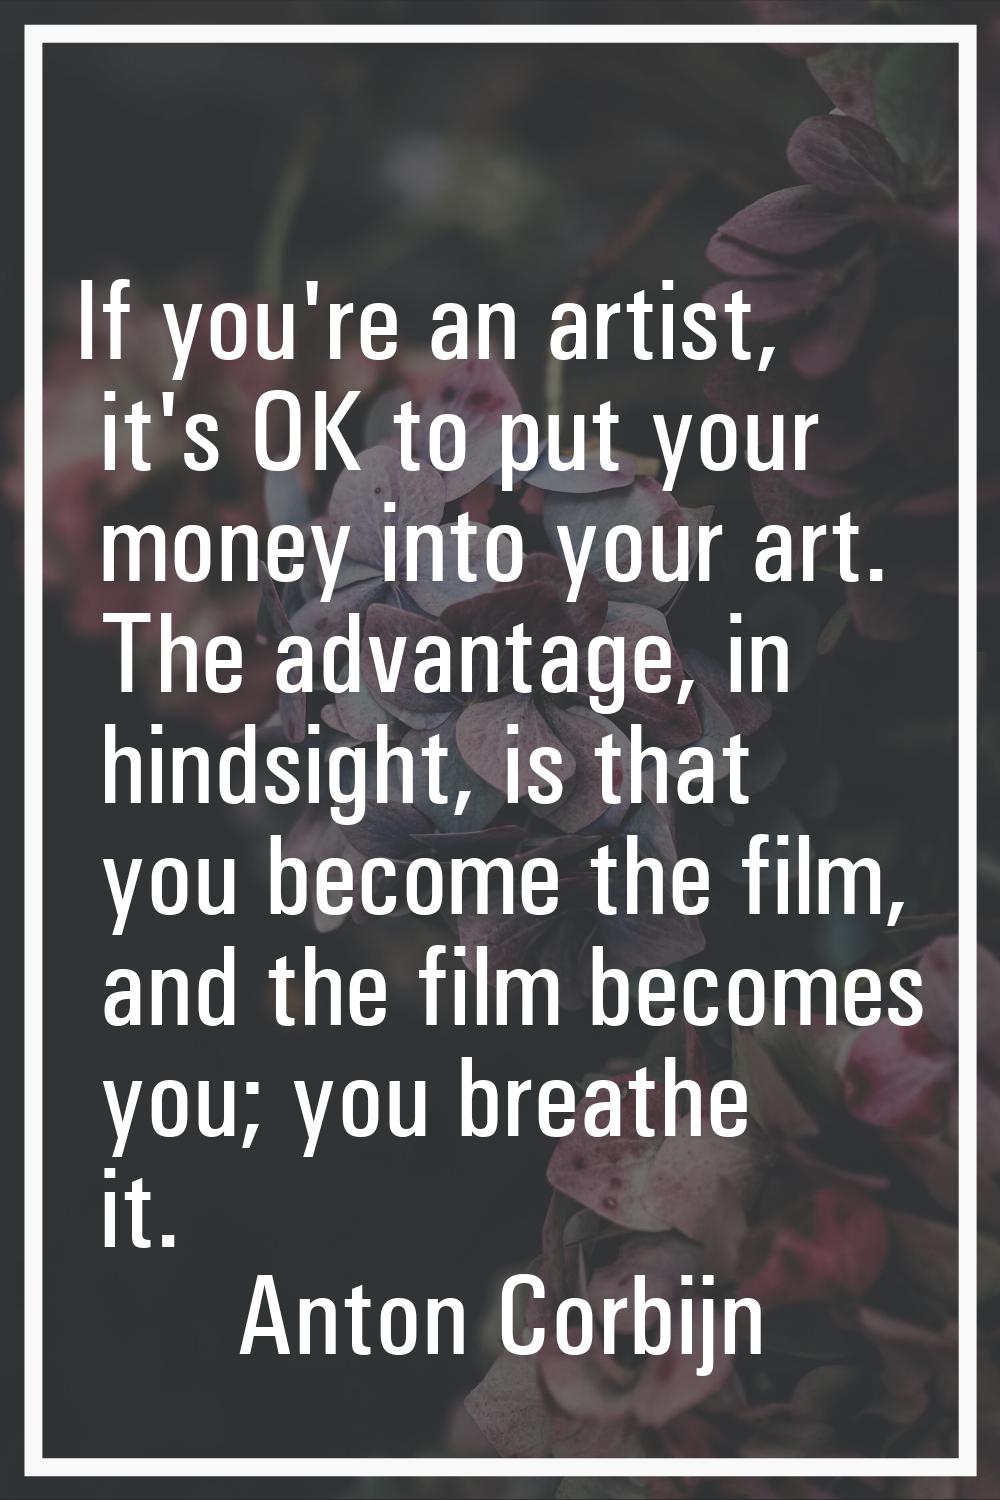 If you're an artist, it's OK to put your money into your art. The advantage, in hindsight, is that 